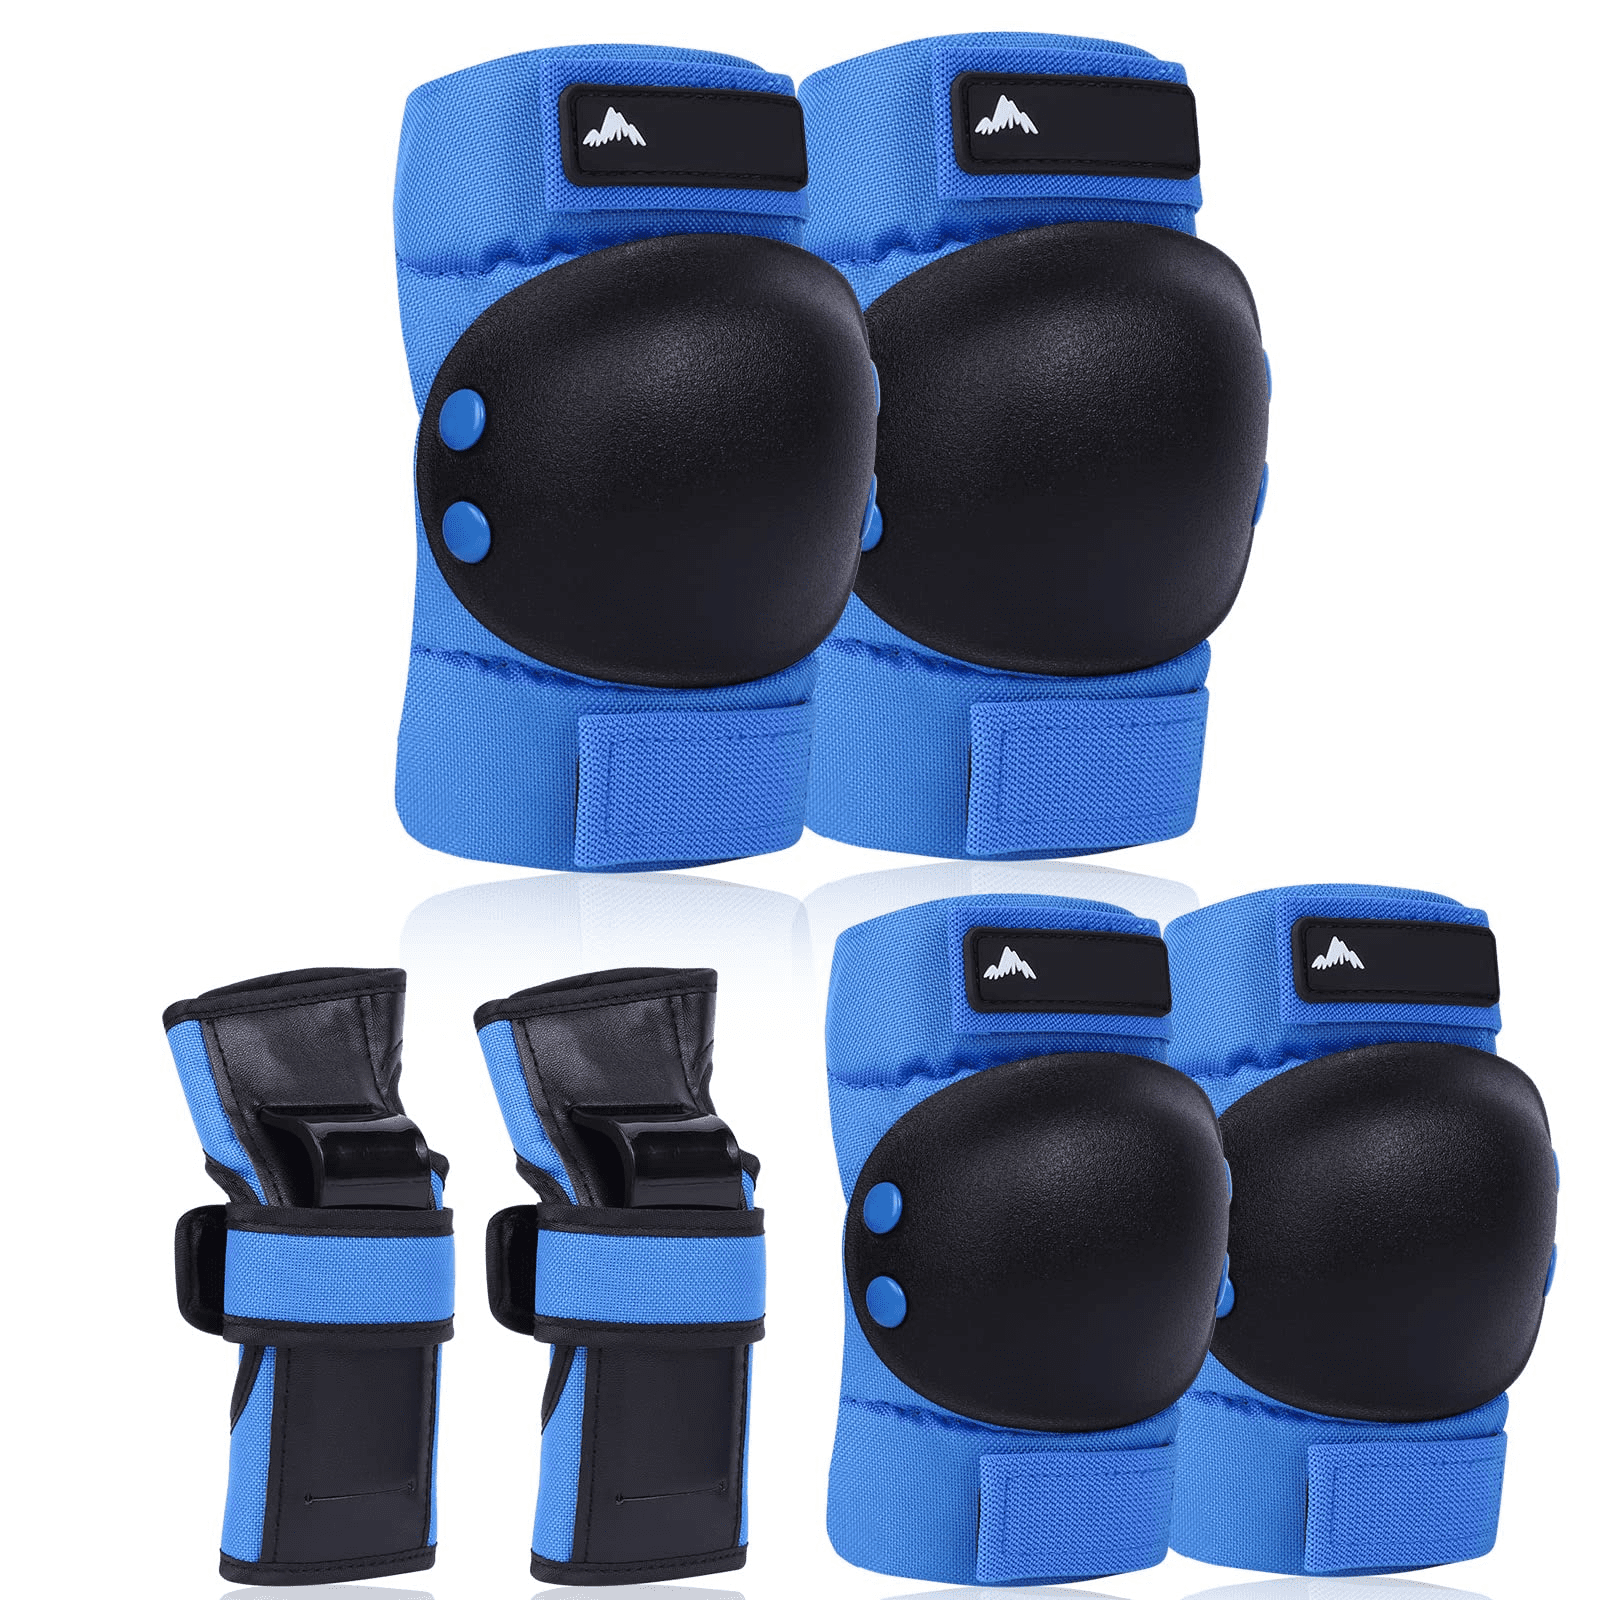 ChromeWheels Kids Knee Pads Elbow Pad Wrist Guards Protective Gear Set for Girls Boys Roller Skates Cycling BMX Bike Skateboard Rollerblade Scooter Inline Skating Multi Outdoor Sports 